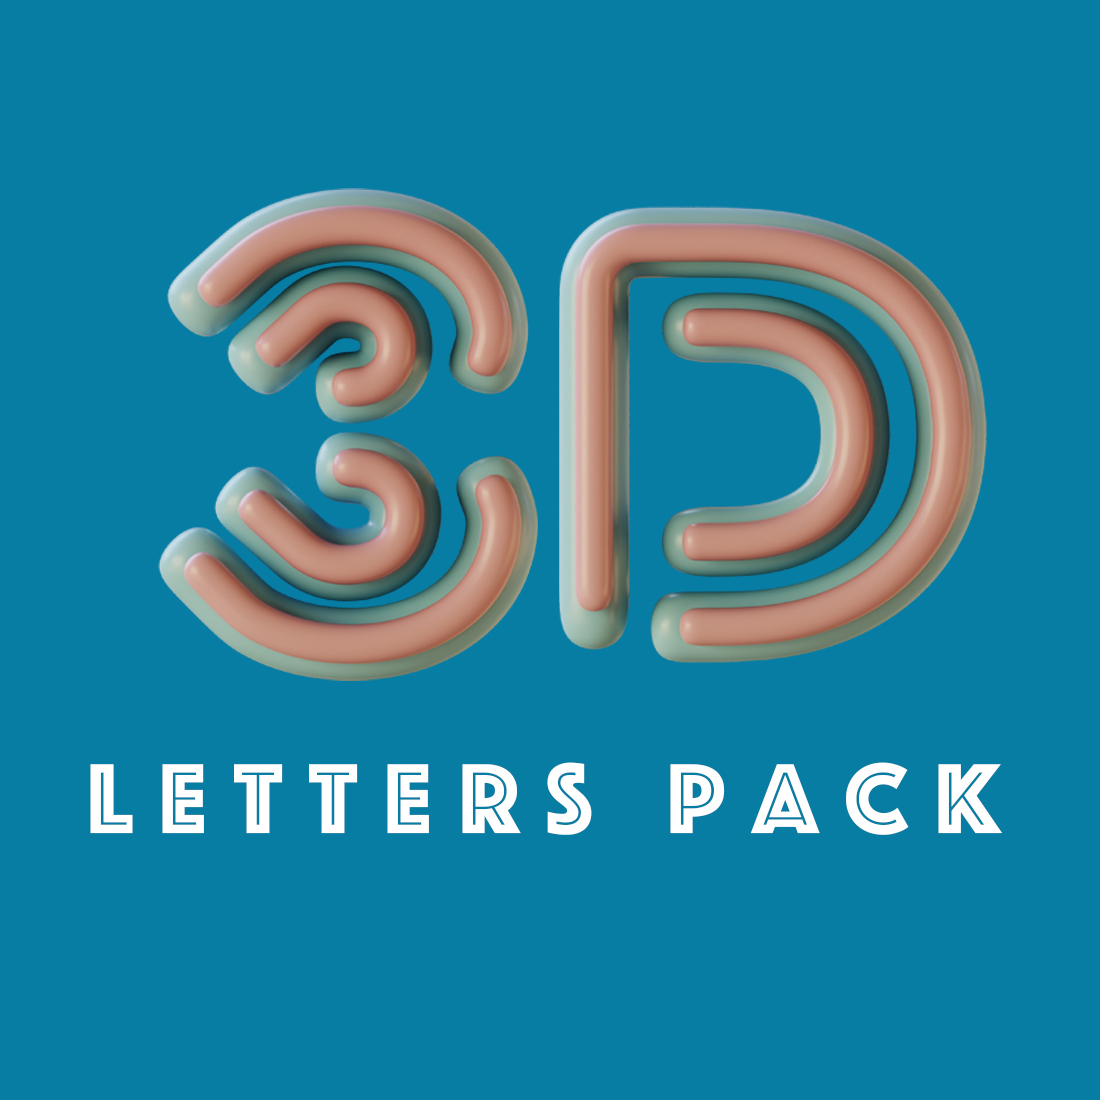 3D Letters Pack cover image.